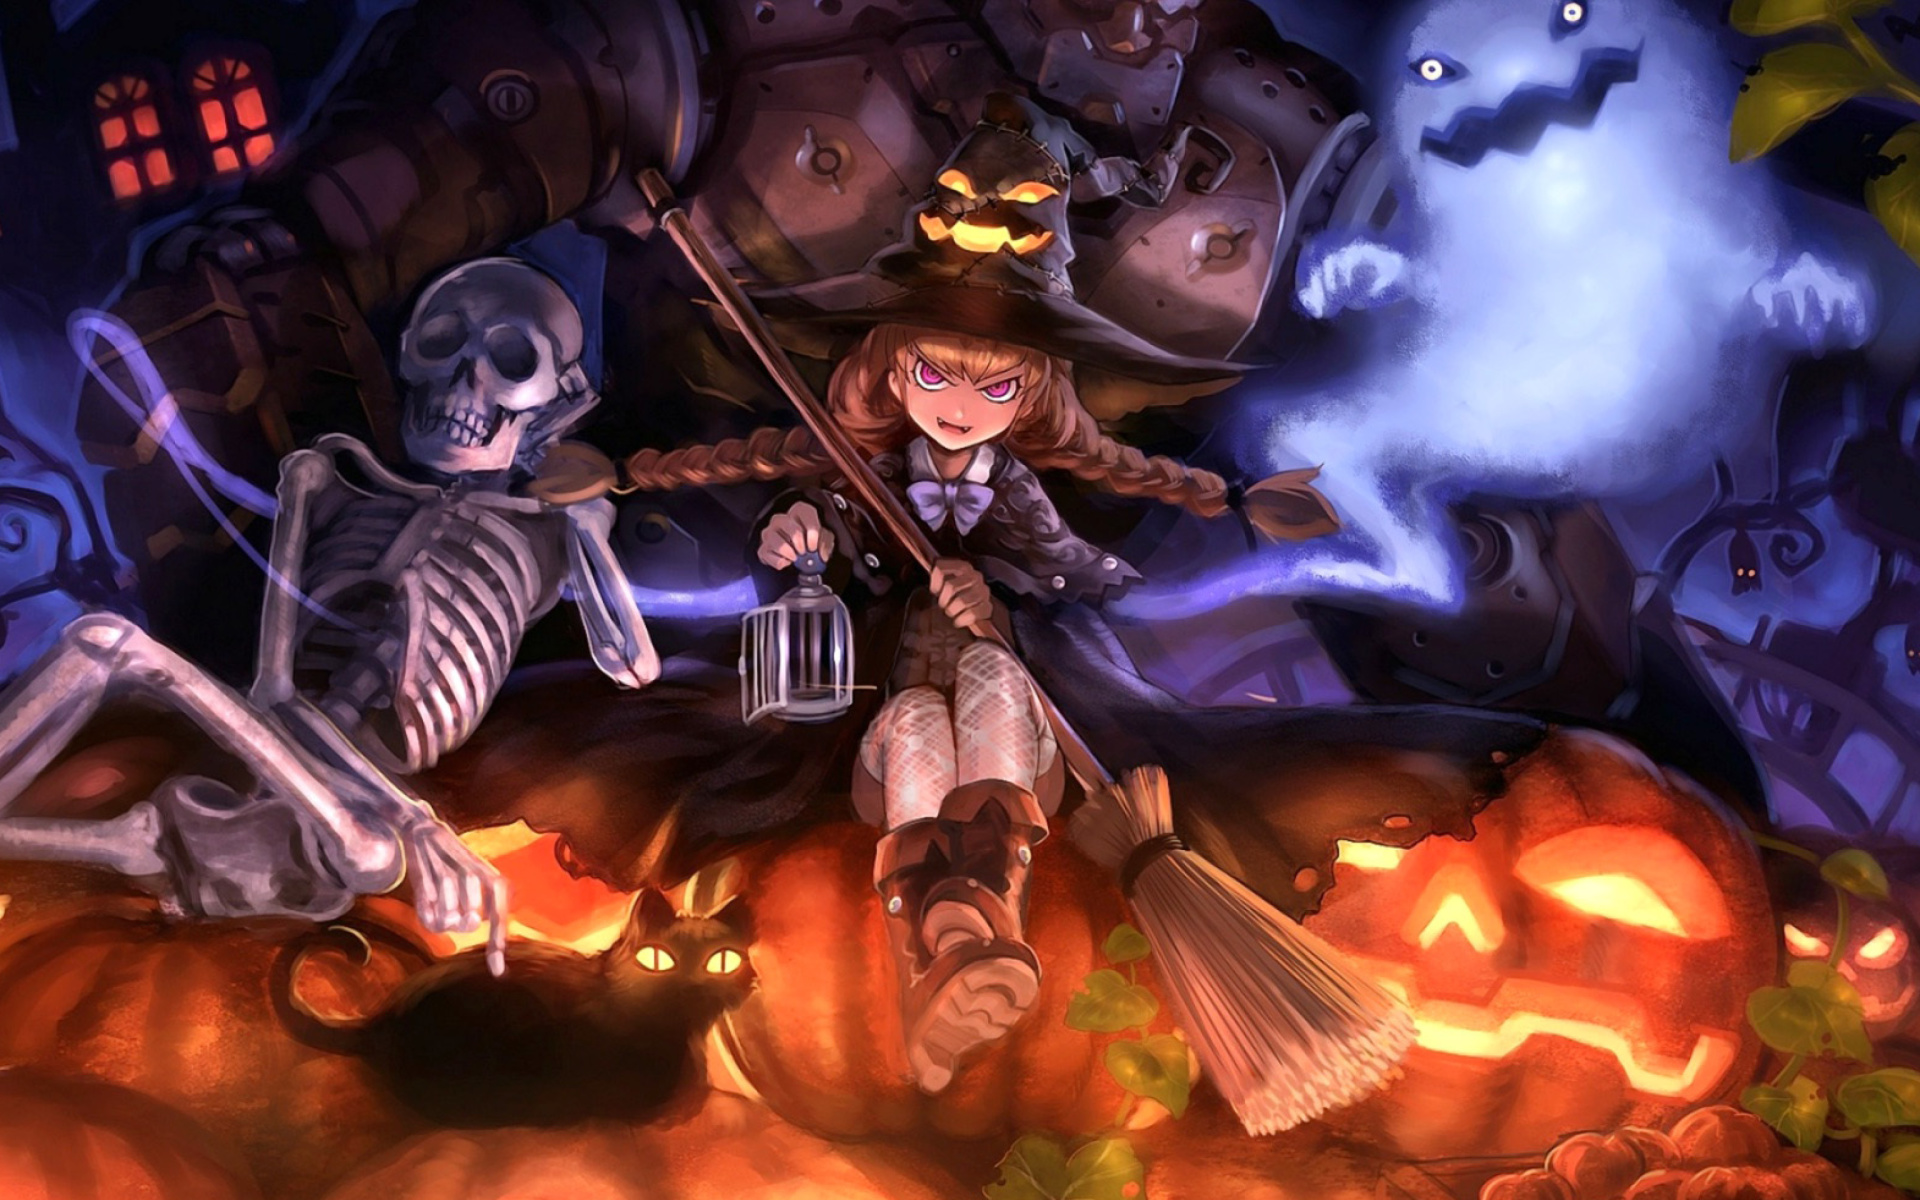 Ghost, skeleton and witch on Halloween screenshot #1 1920x1200